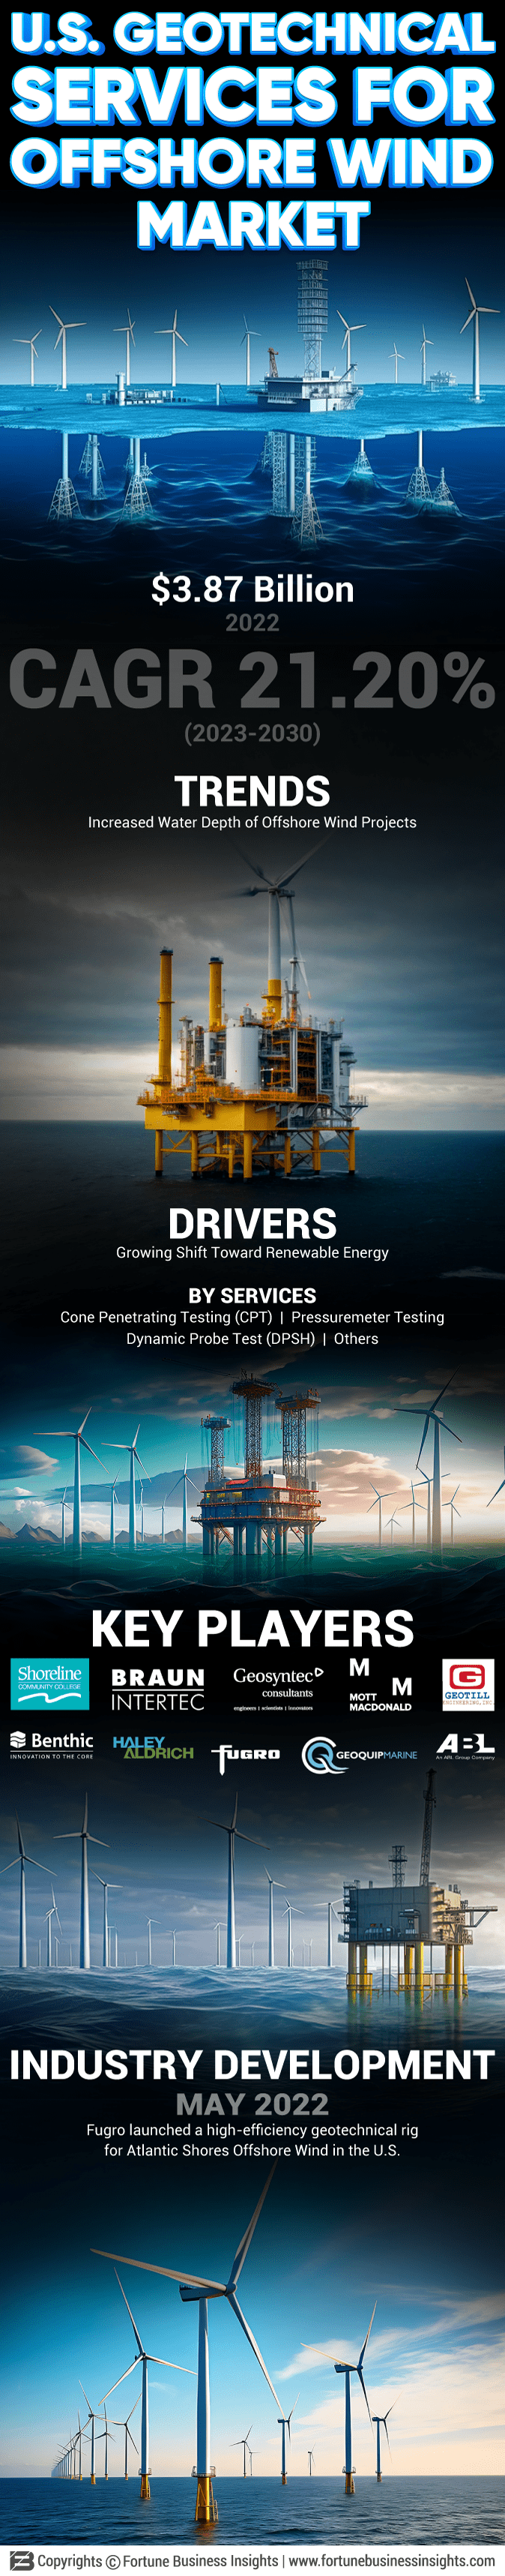 U.S. Geotechnical Services for Offshore Wind Market